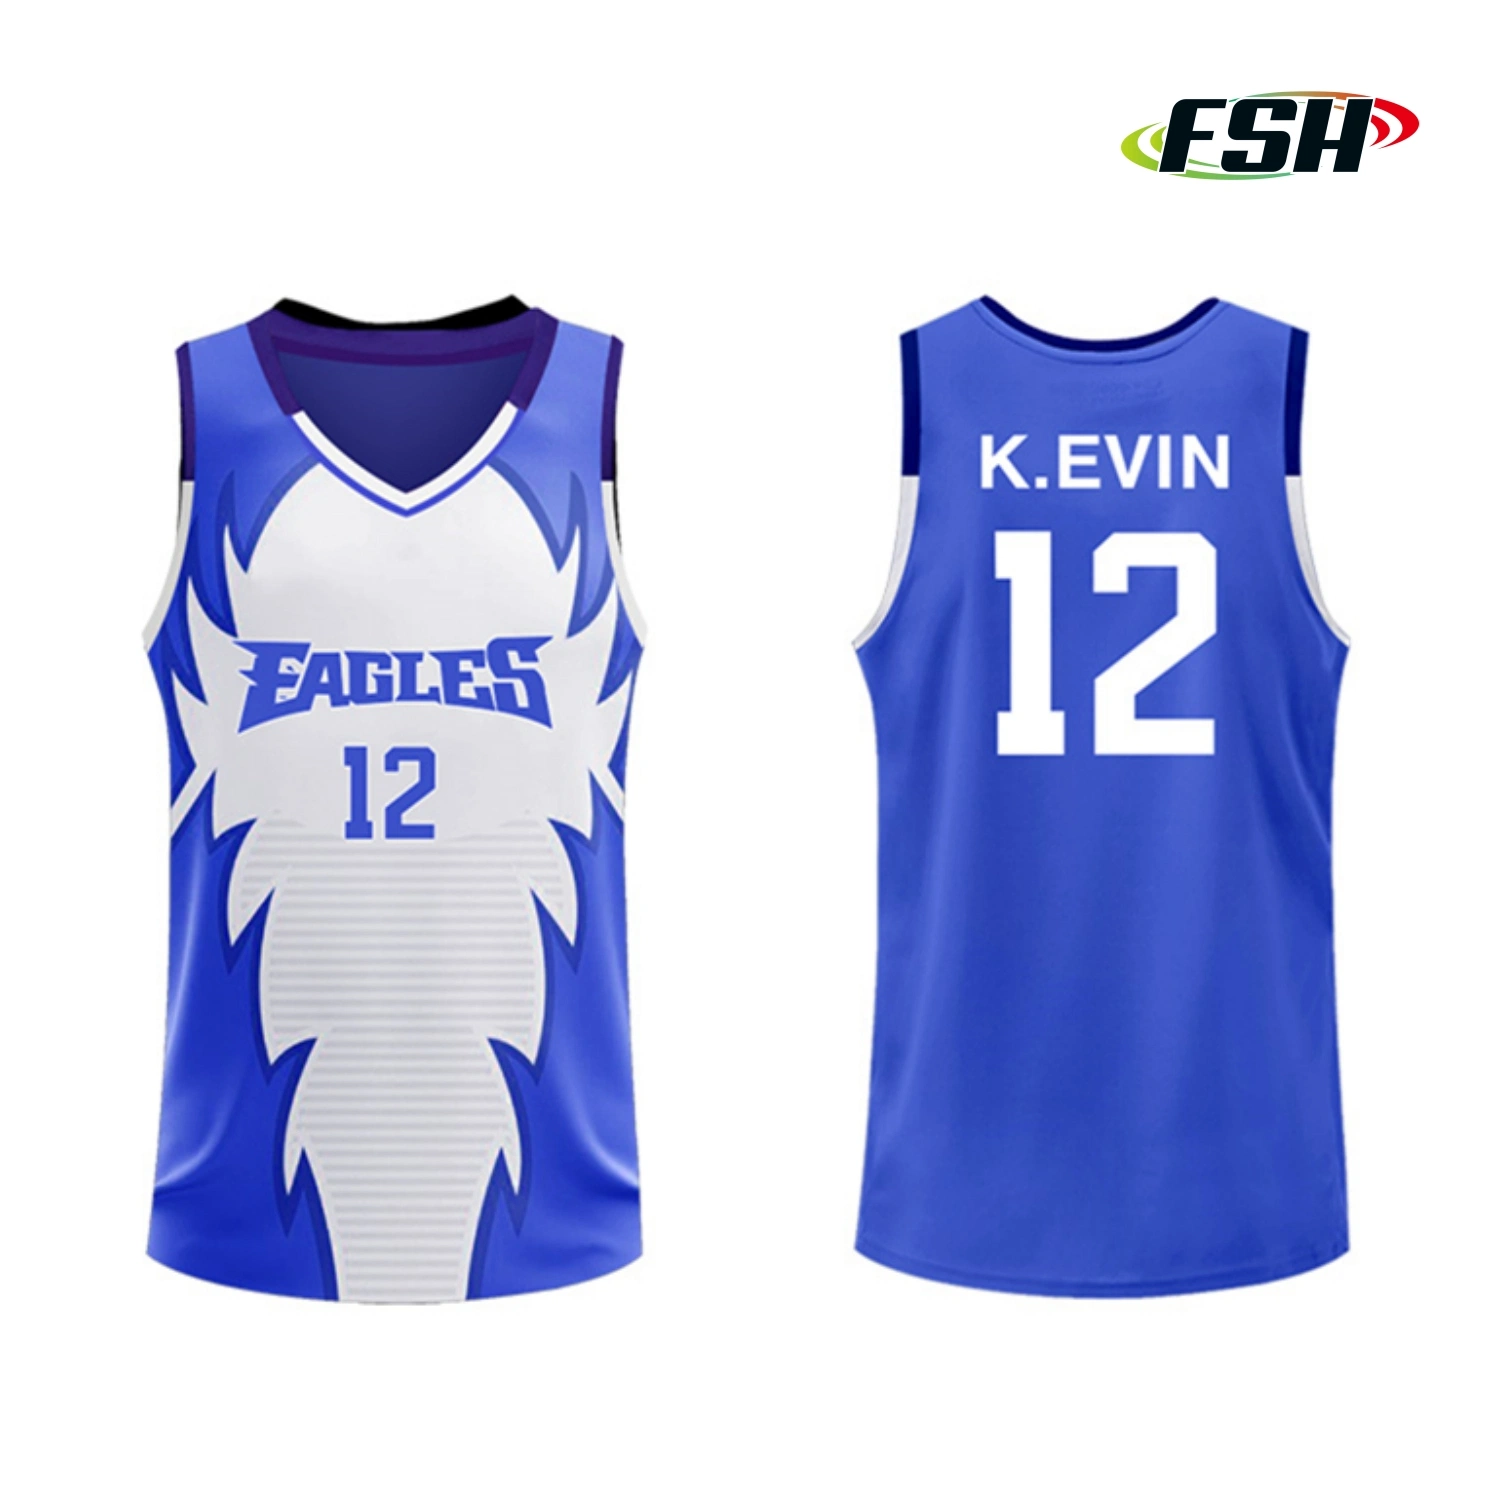 Wholesale/Supplier Supply Cheap All-Team Embroidered Basketball Jerseys Men's Sports Wear